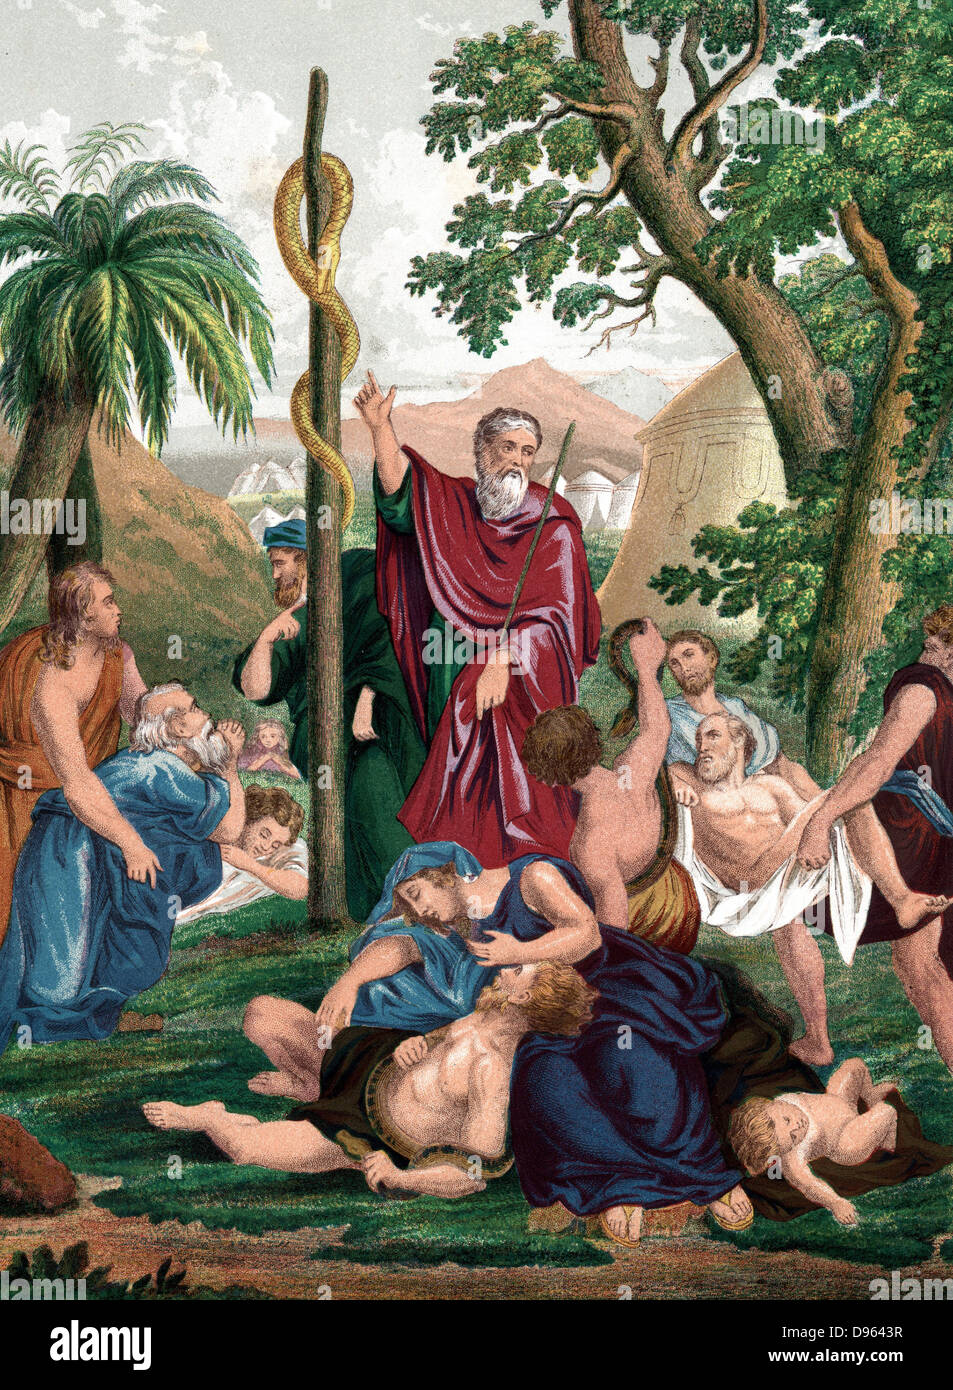 Moses, having interceded with God on behalf of Israelites in the wilderness, instructs them to look on brazen serpent he has made and they will be cured of their snake bites.  'Bible' Numbers 21.  Chromolithograph c1860 Stock Photo